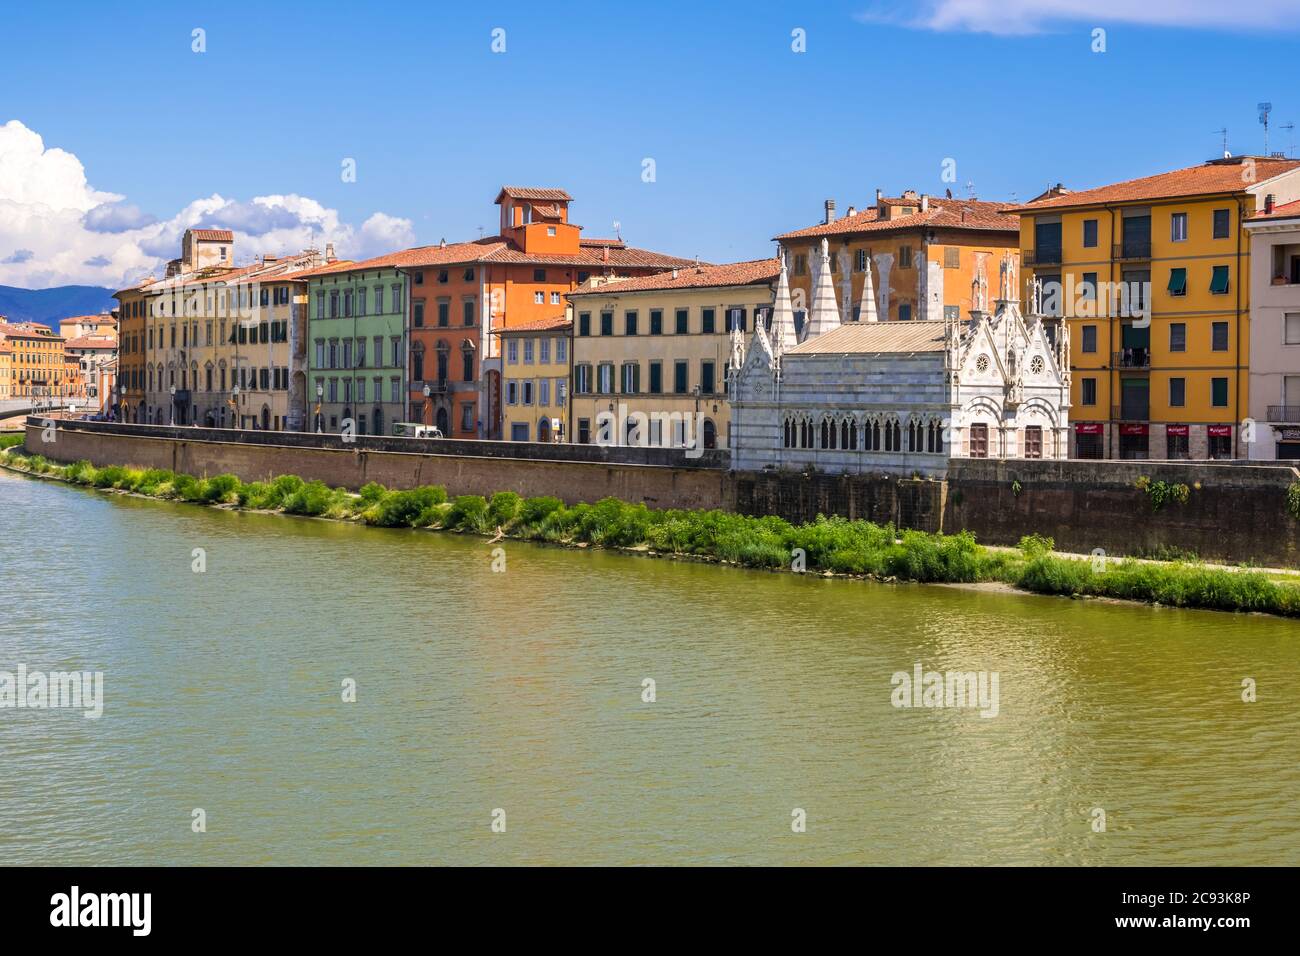 Pisa, Italy - August 14, 2019: Gothic church Santa Maria della Spina on the embankment of the Arno River in Pisa, region of Tuscany, Italy Stock Photo